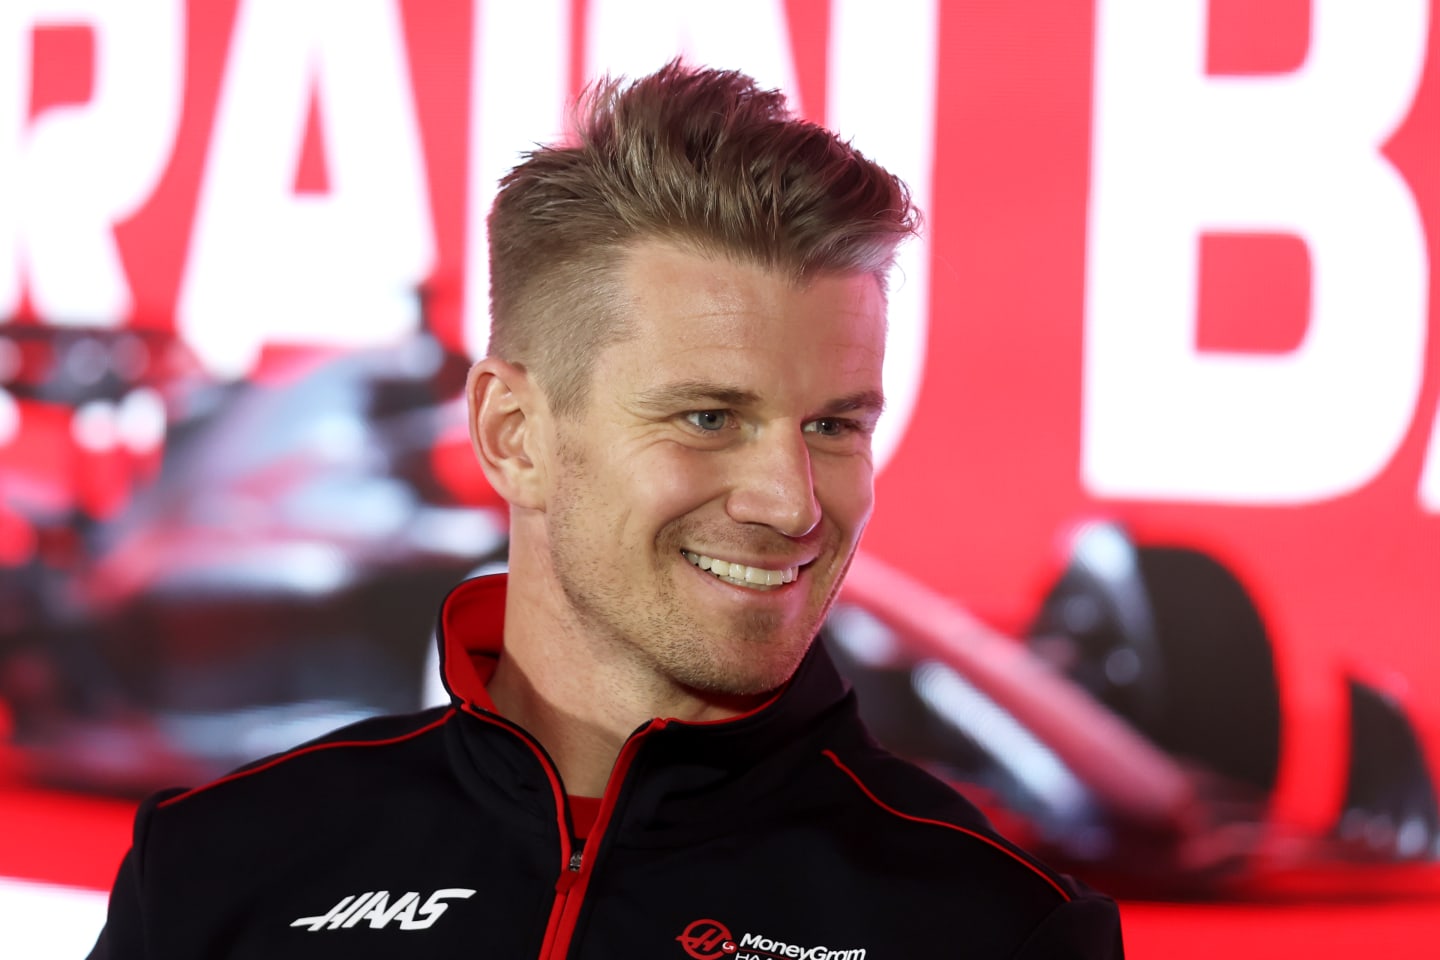 BAHRAIN, BAHRAIN - MARCH 02: Nico Hulkenberg of Germany and Haas F1 attends the Drivers Press Conference during previews ahead of the F1 Grand Prix of Bahrain at Bahrain International Circuit on March 02, 2023 in Bahrain, Bahrain. (Photo by Lars Baron/Getty Images)